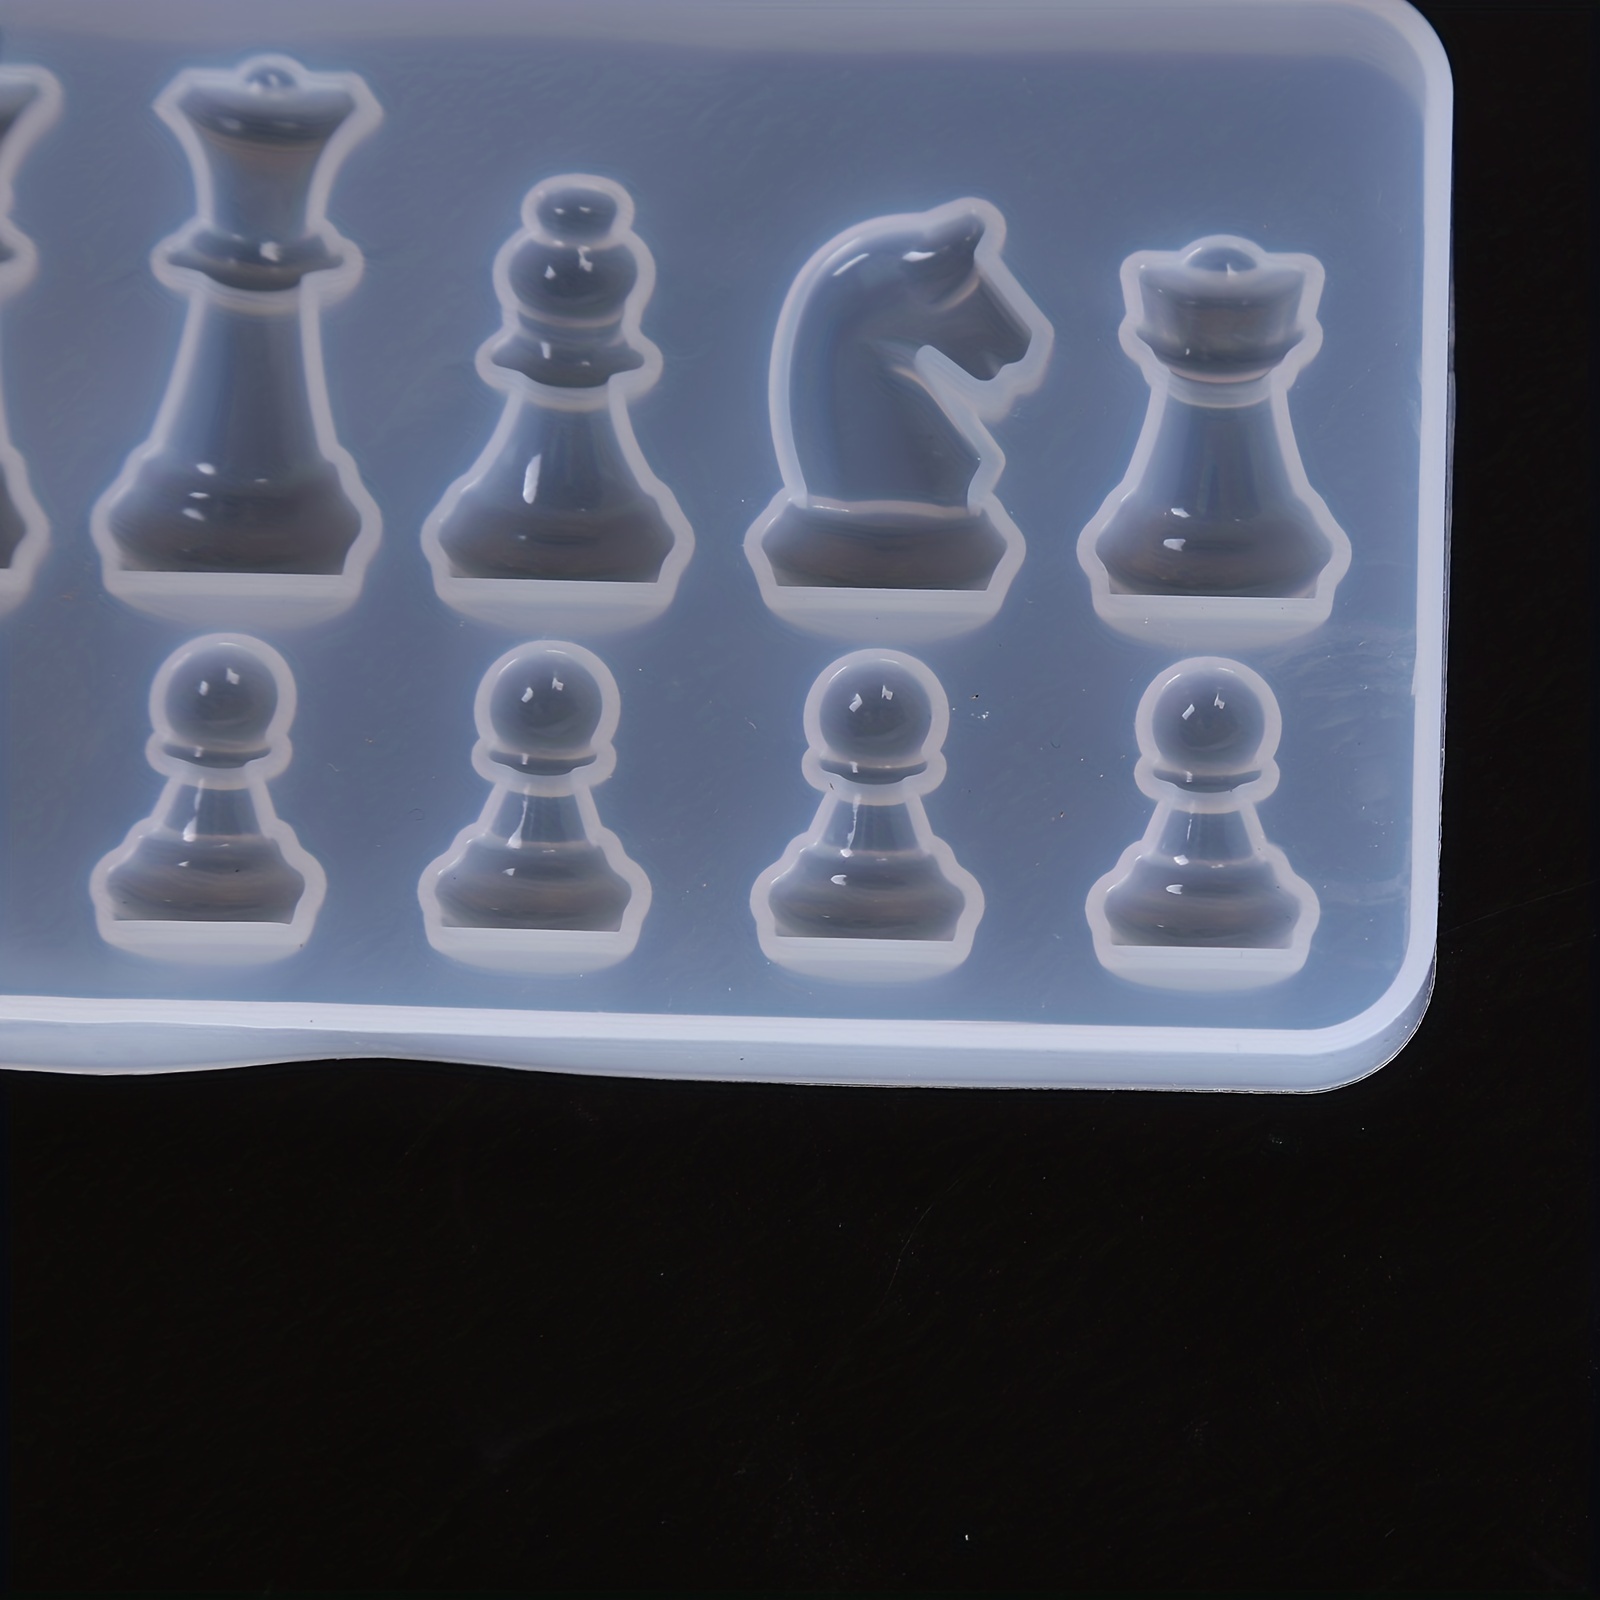 6pcs Chess Mold for Resin, Resin Chess Mold 3D Silicone, 3D Chess Board Resin  Molds Flexible